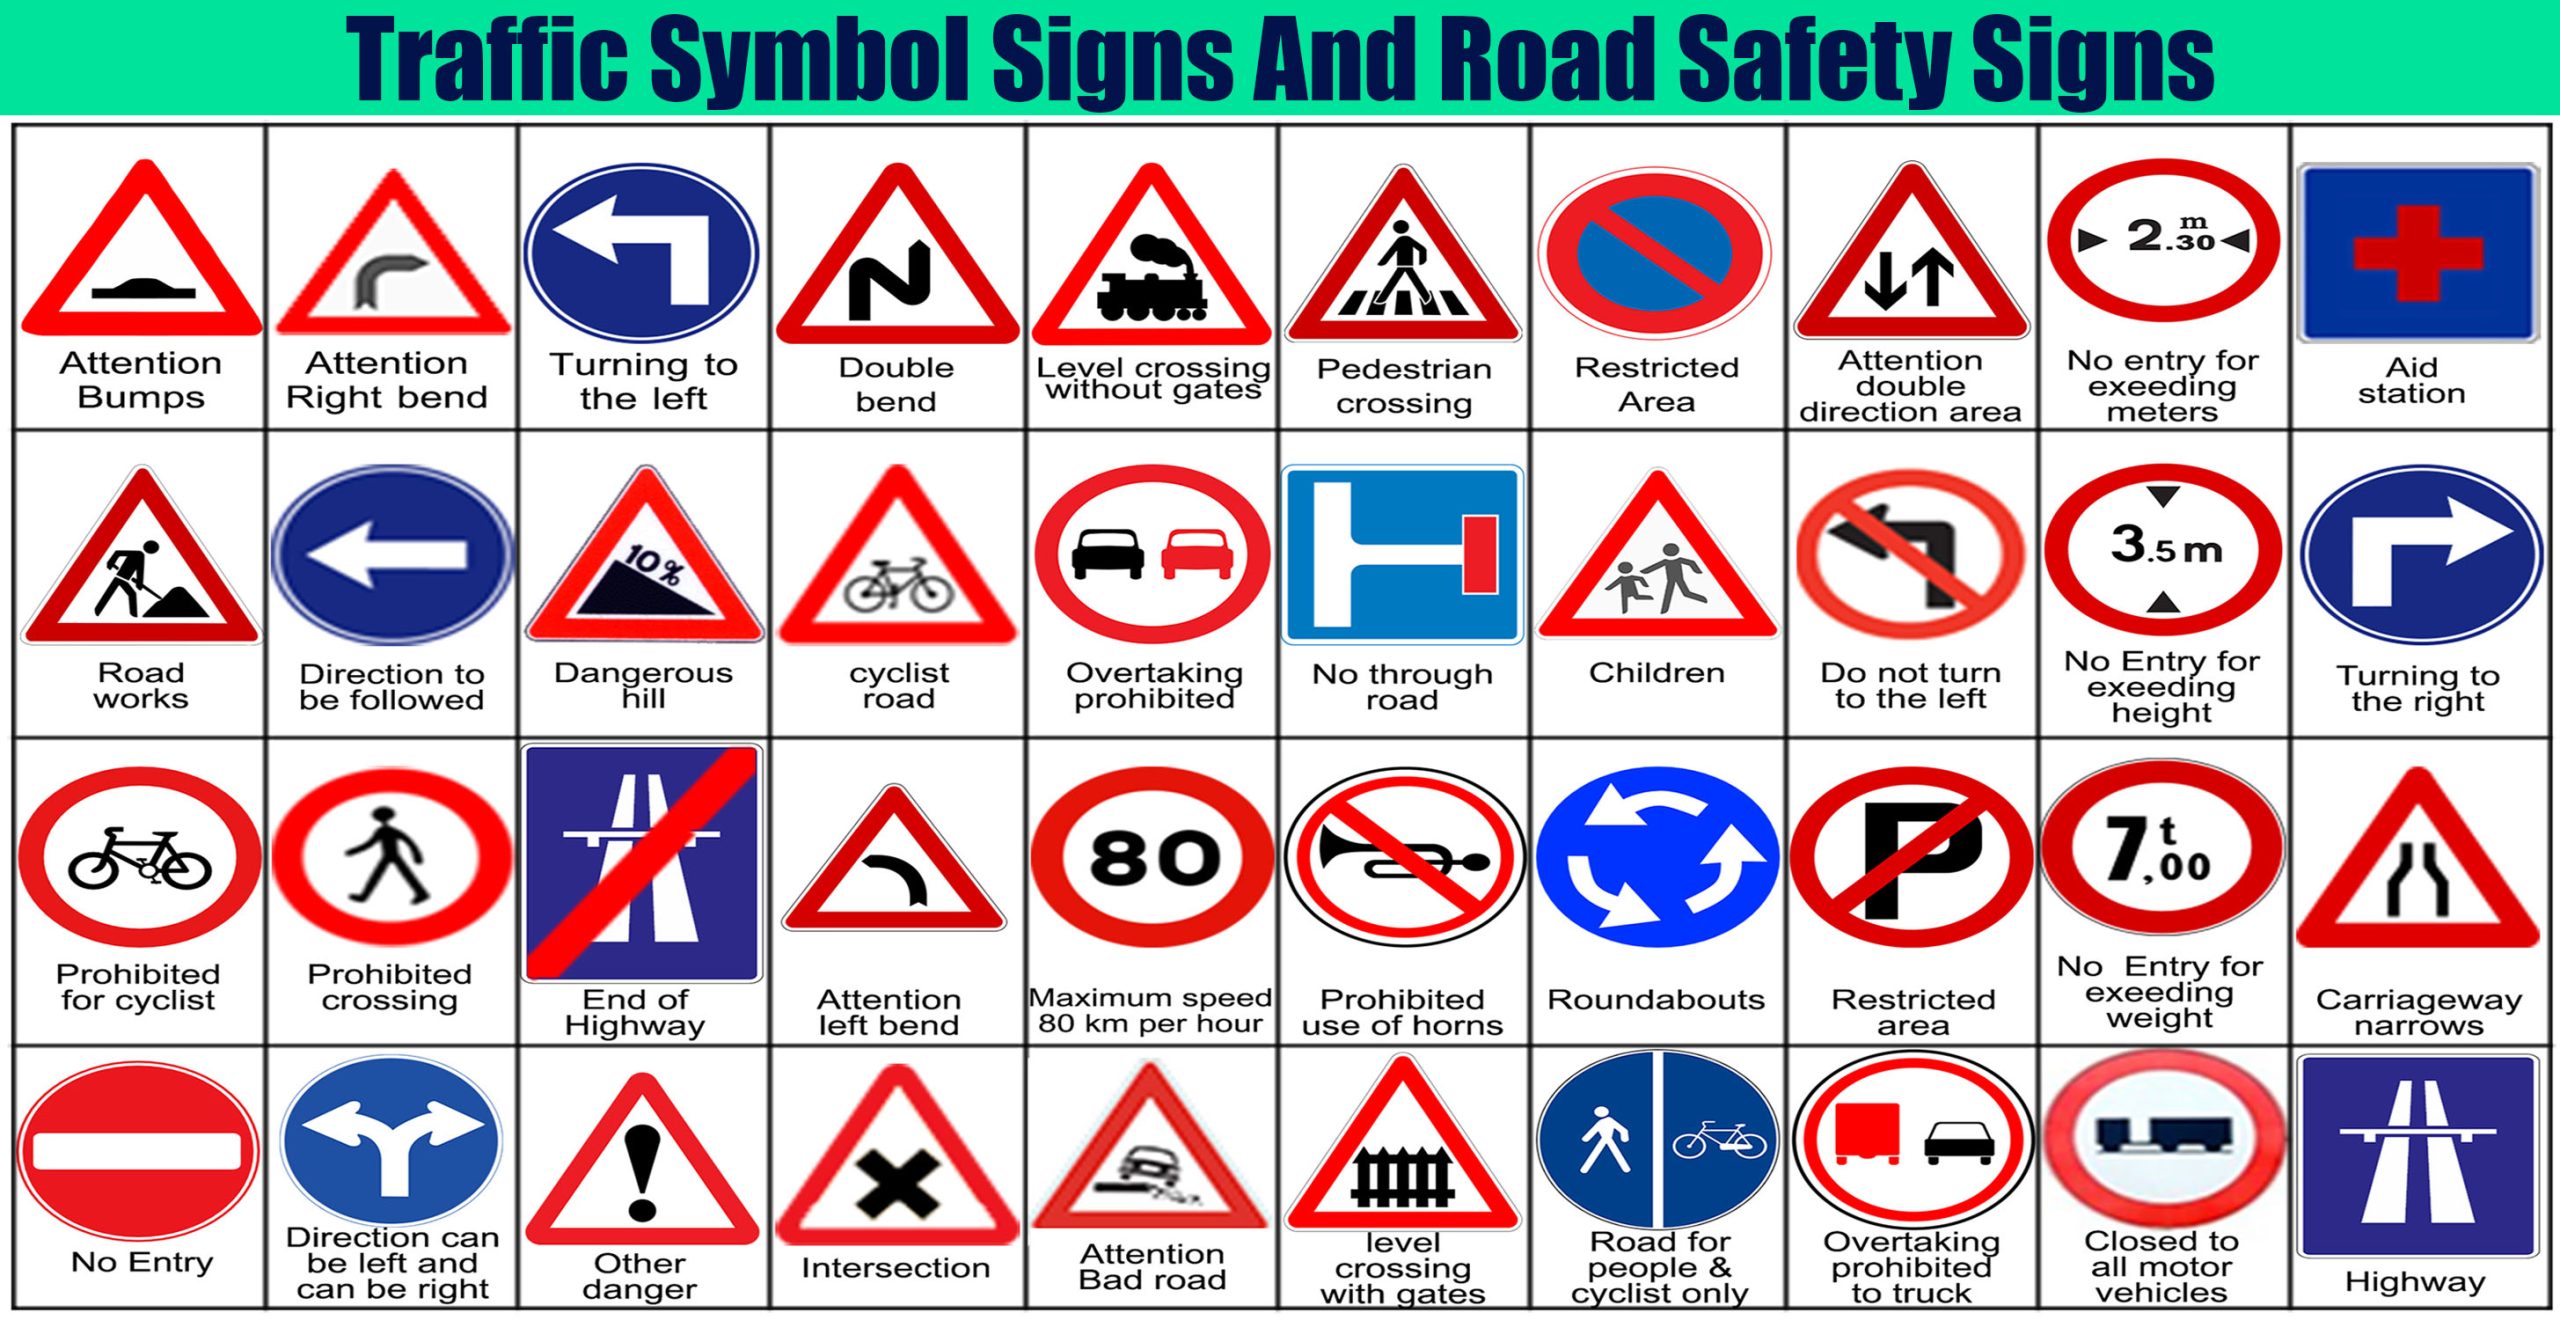 Traffic Symbol Signs And Road Safety Signs Scaled 